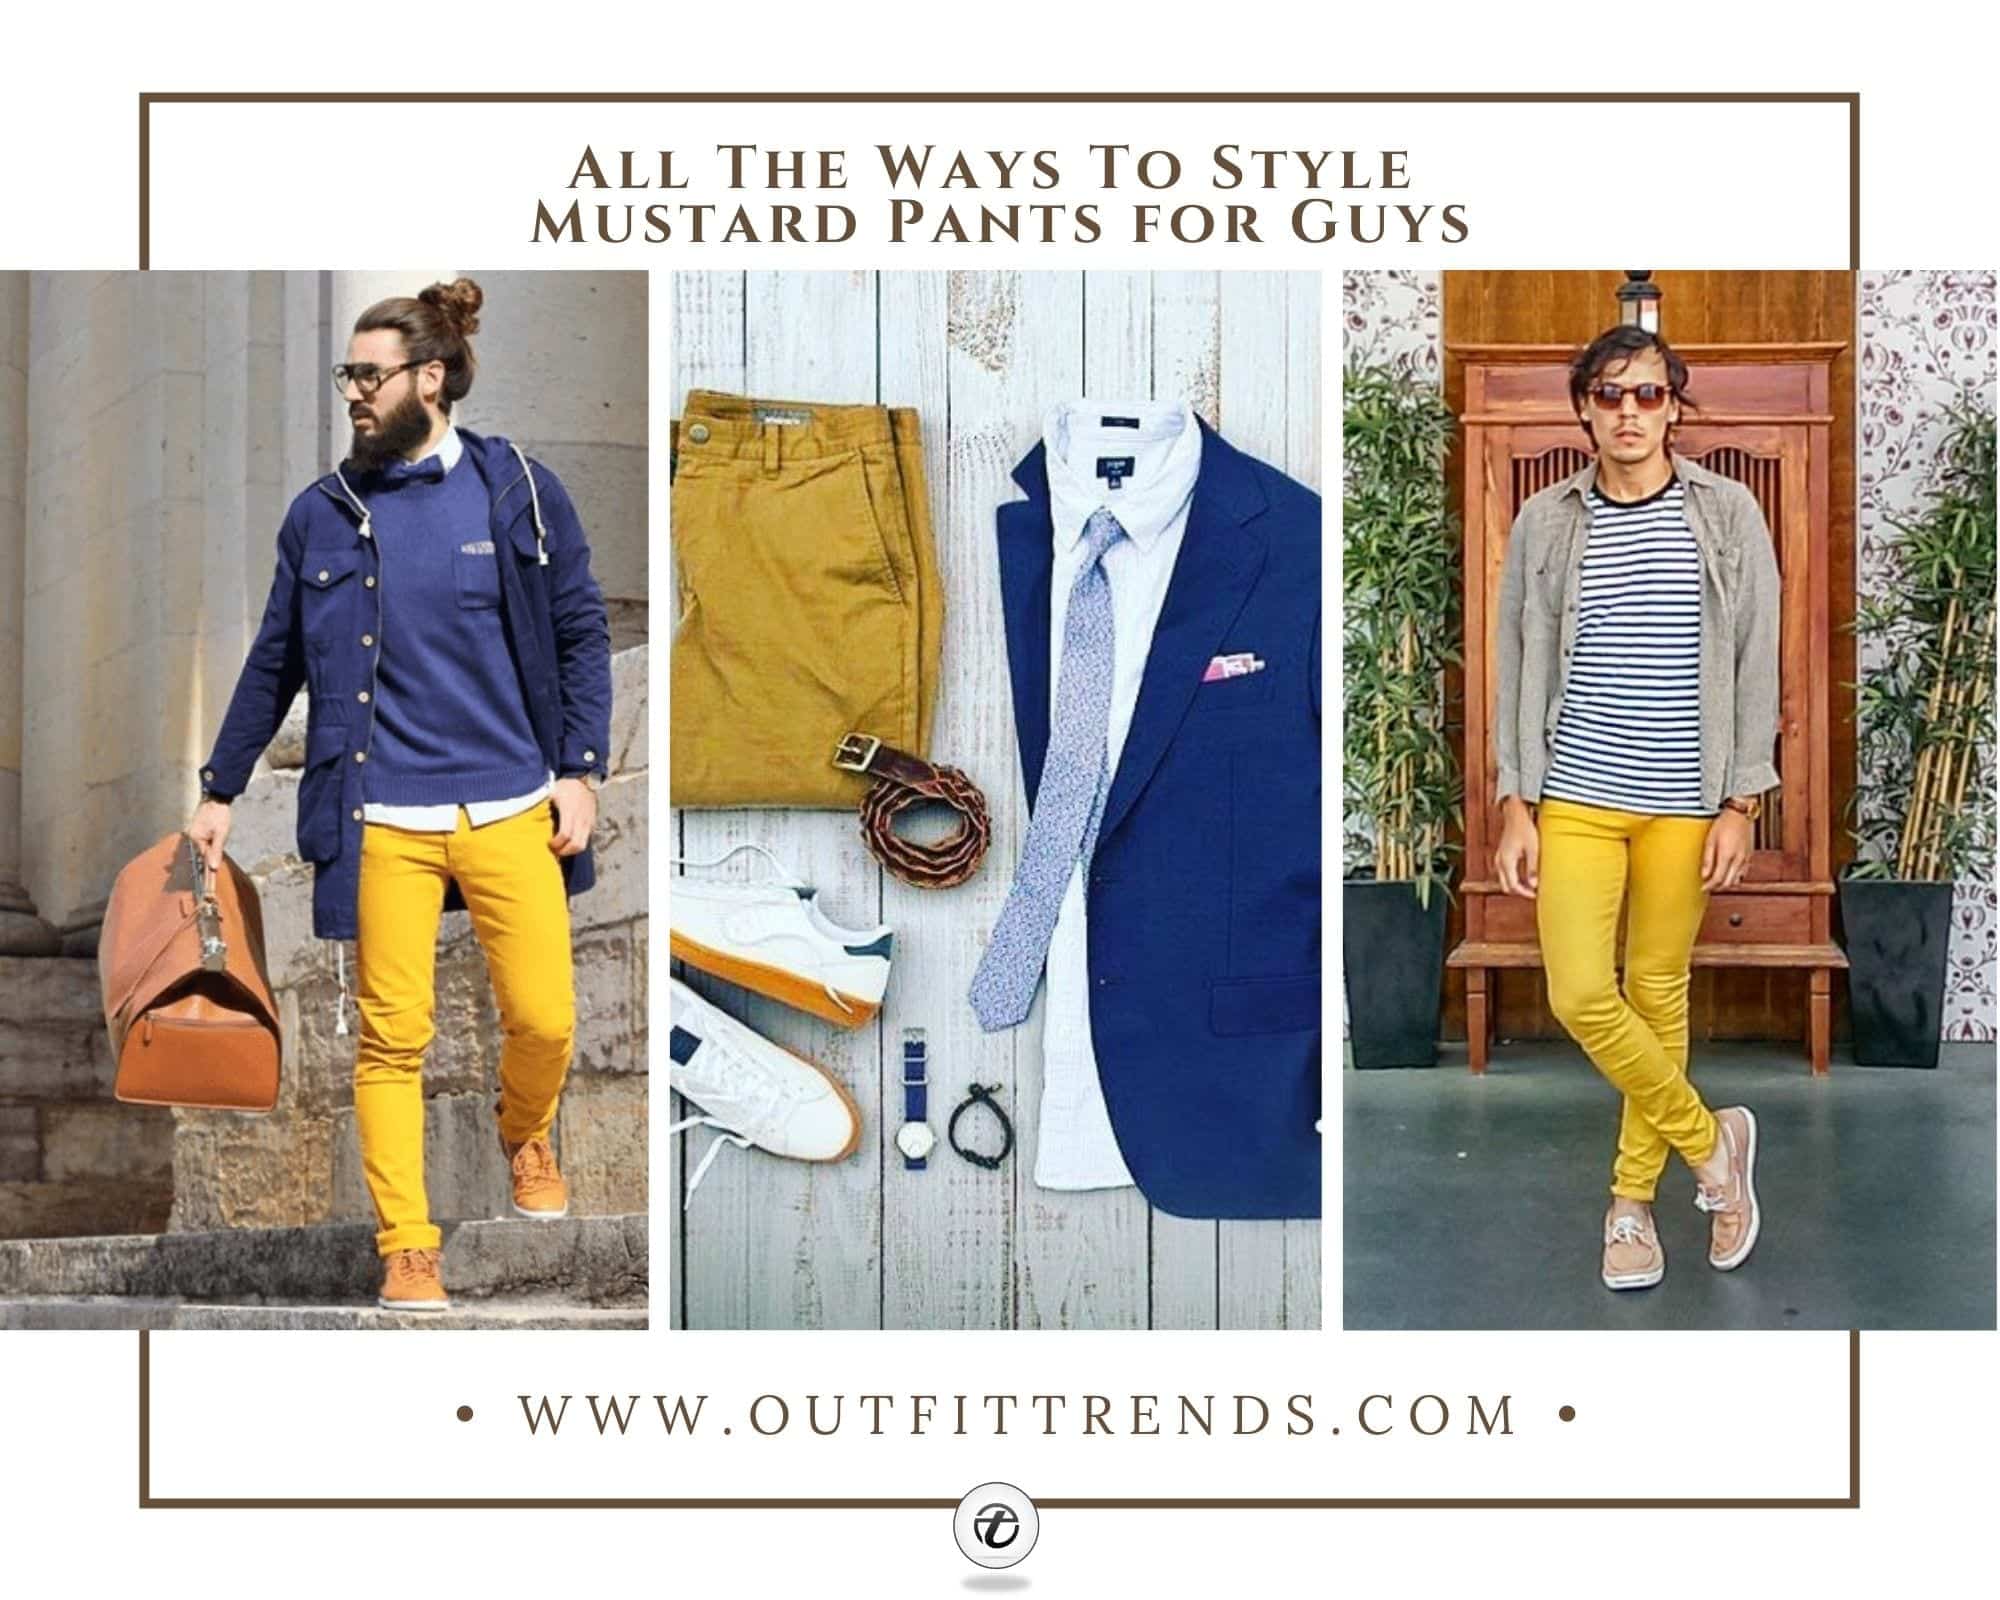 Hem and Stitch Slim Fit Men Yellow Trousers  Buy Hem and Stitch Slim Fit Men  Yellow Trousers Online at Best Prices in India  Flipkartcom